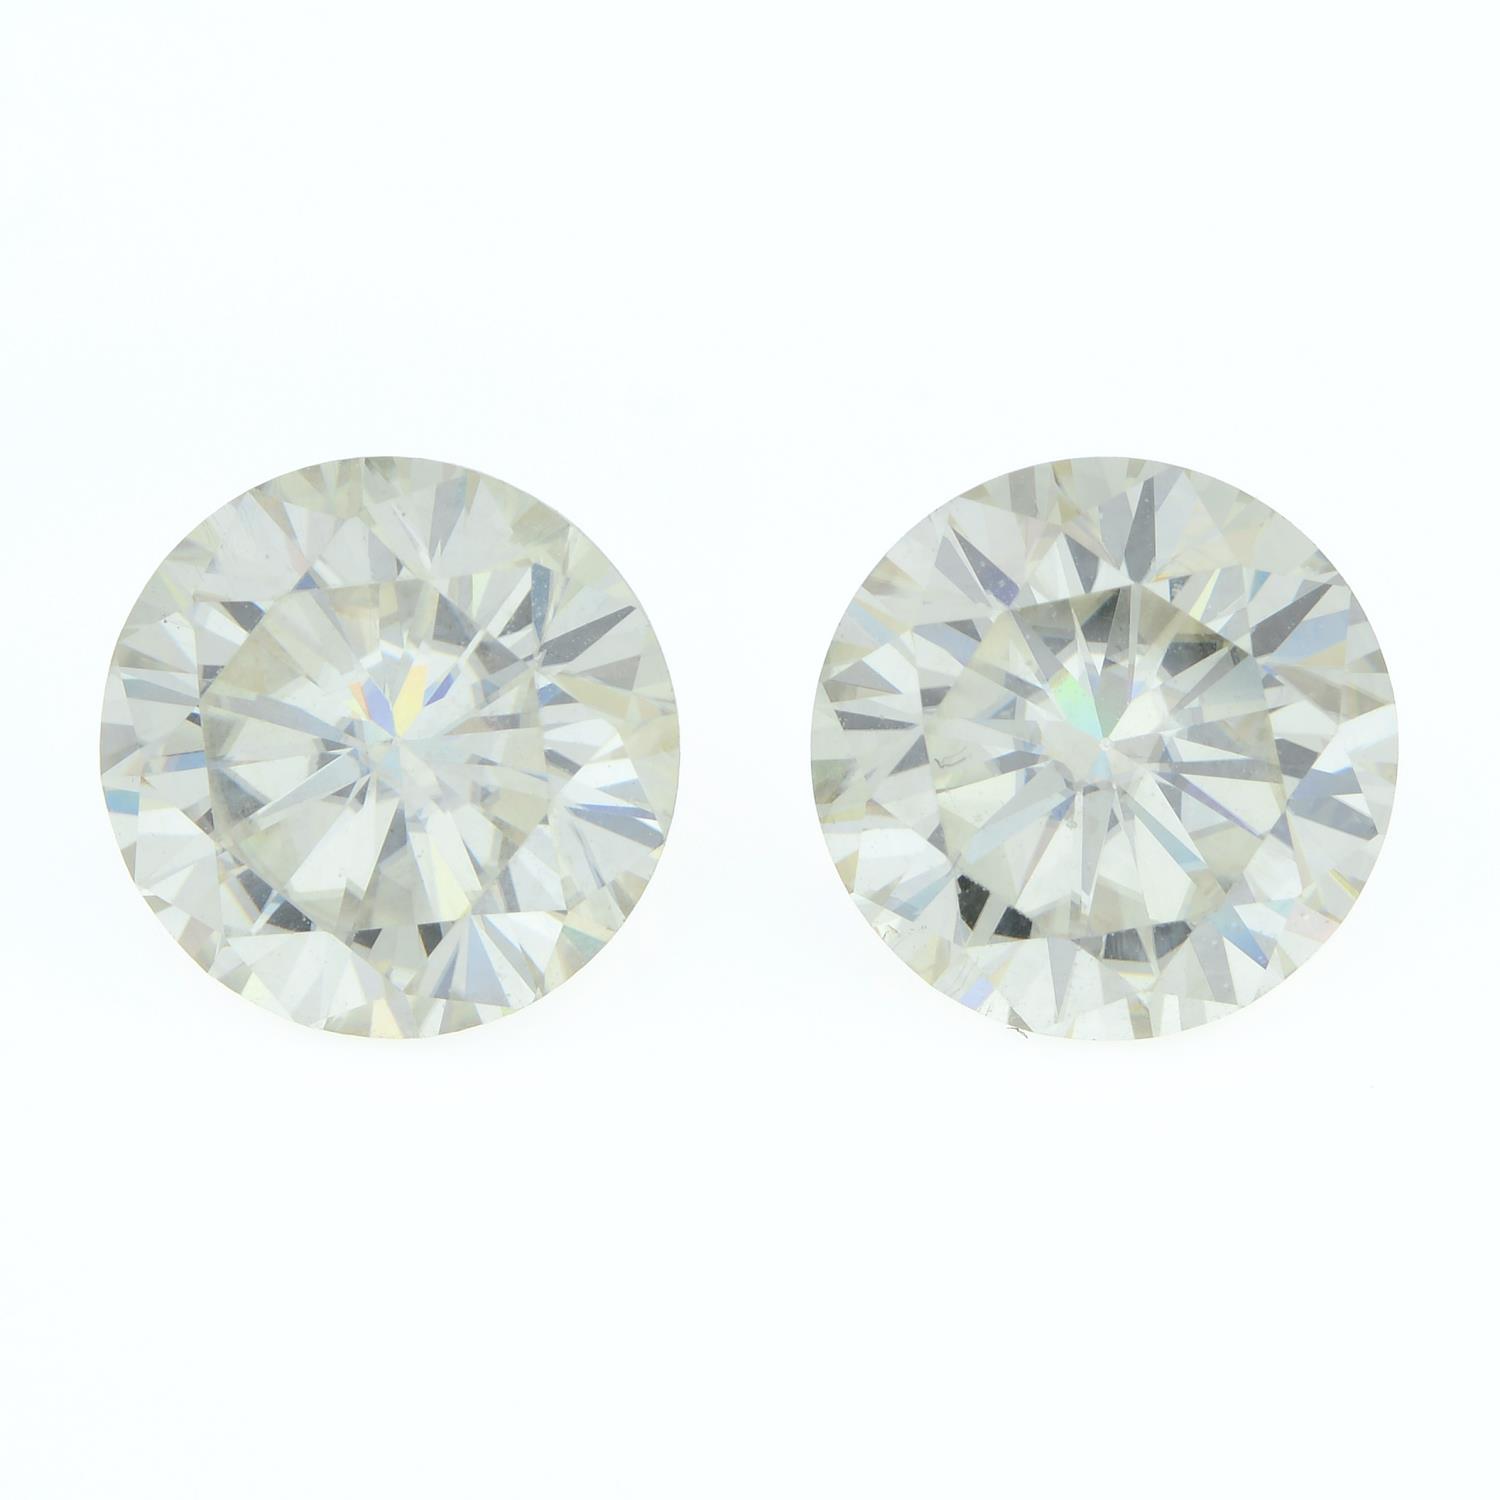 A pair of circular-shape synthetic moissanite, weighing 7.58cts total.